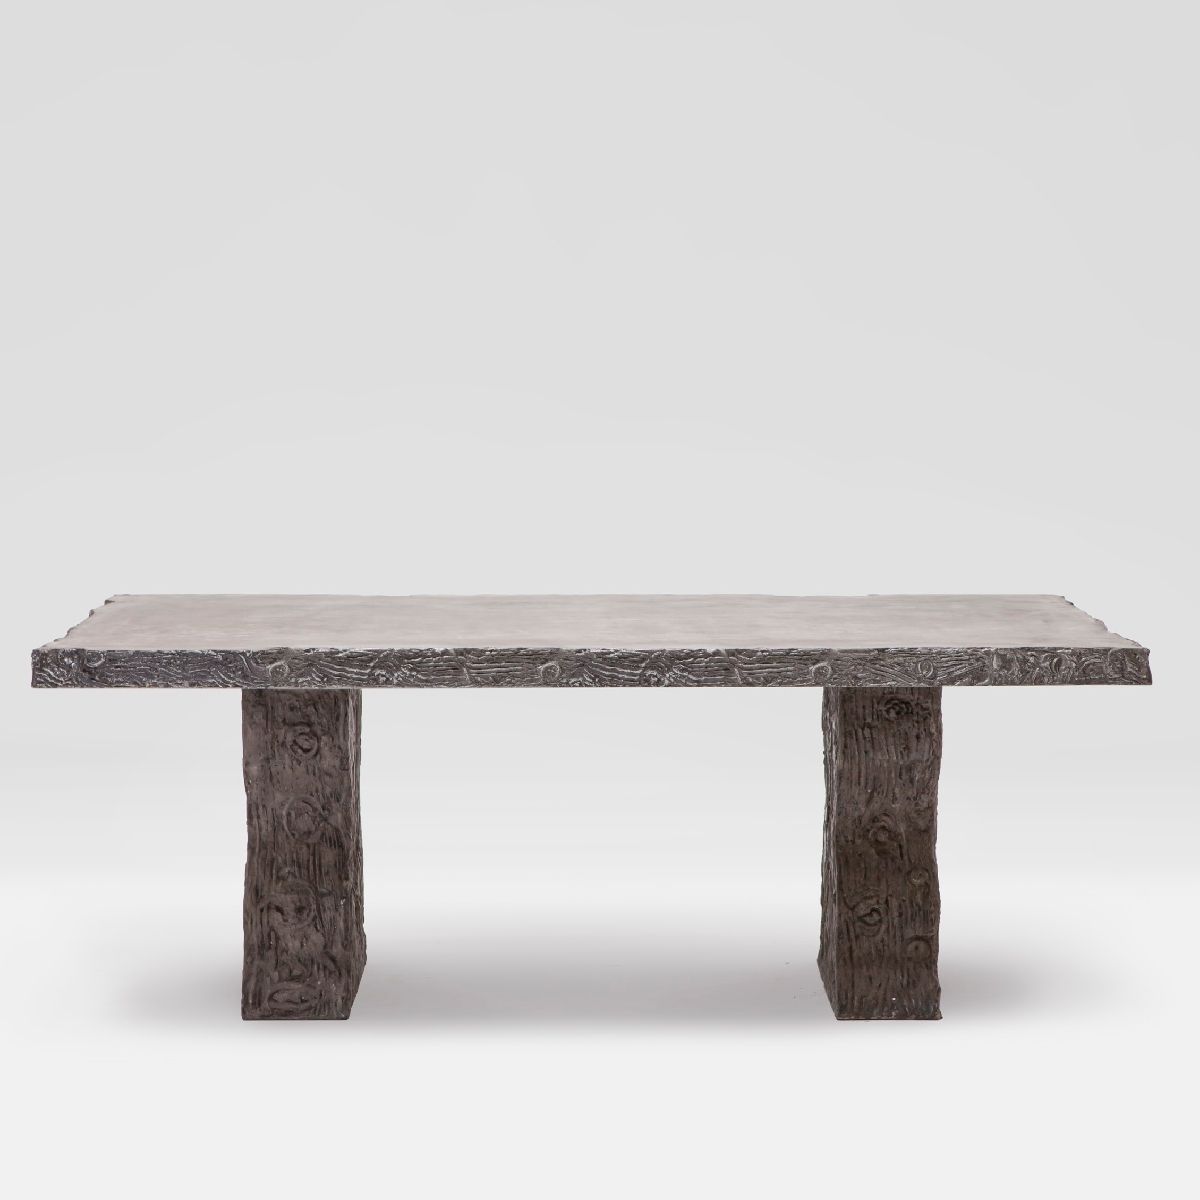 Preferred Faux Bois Outdoor Concrete Dining Table – Mecox Gardens Intended For Faux Wood Outdoor Tables (View 12 of 15)